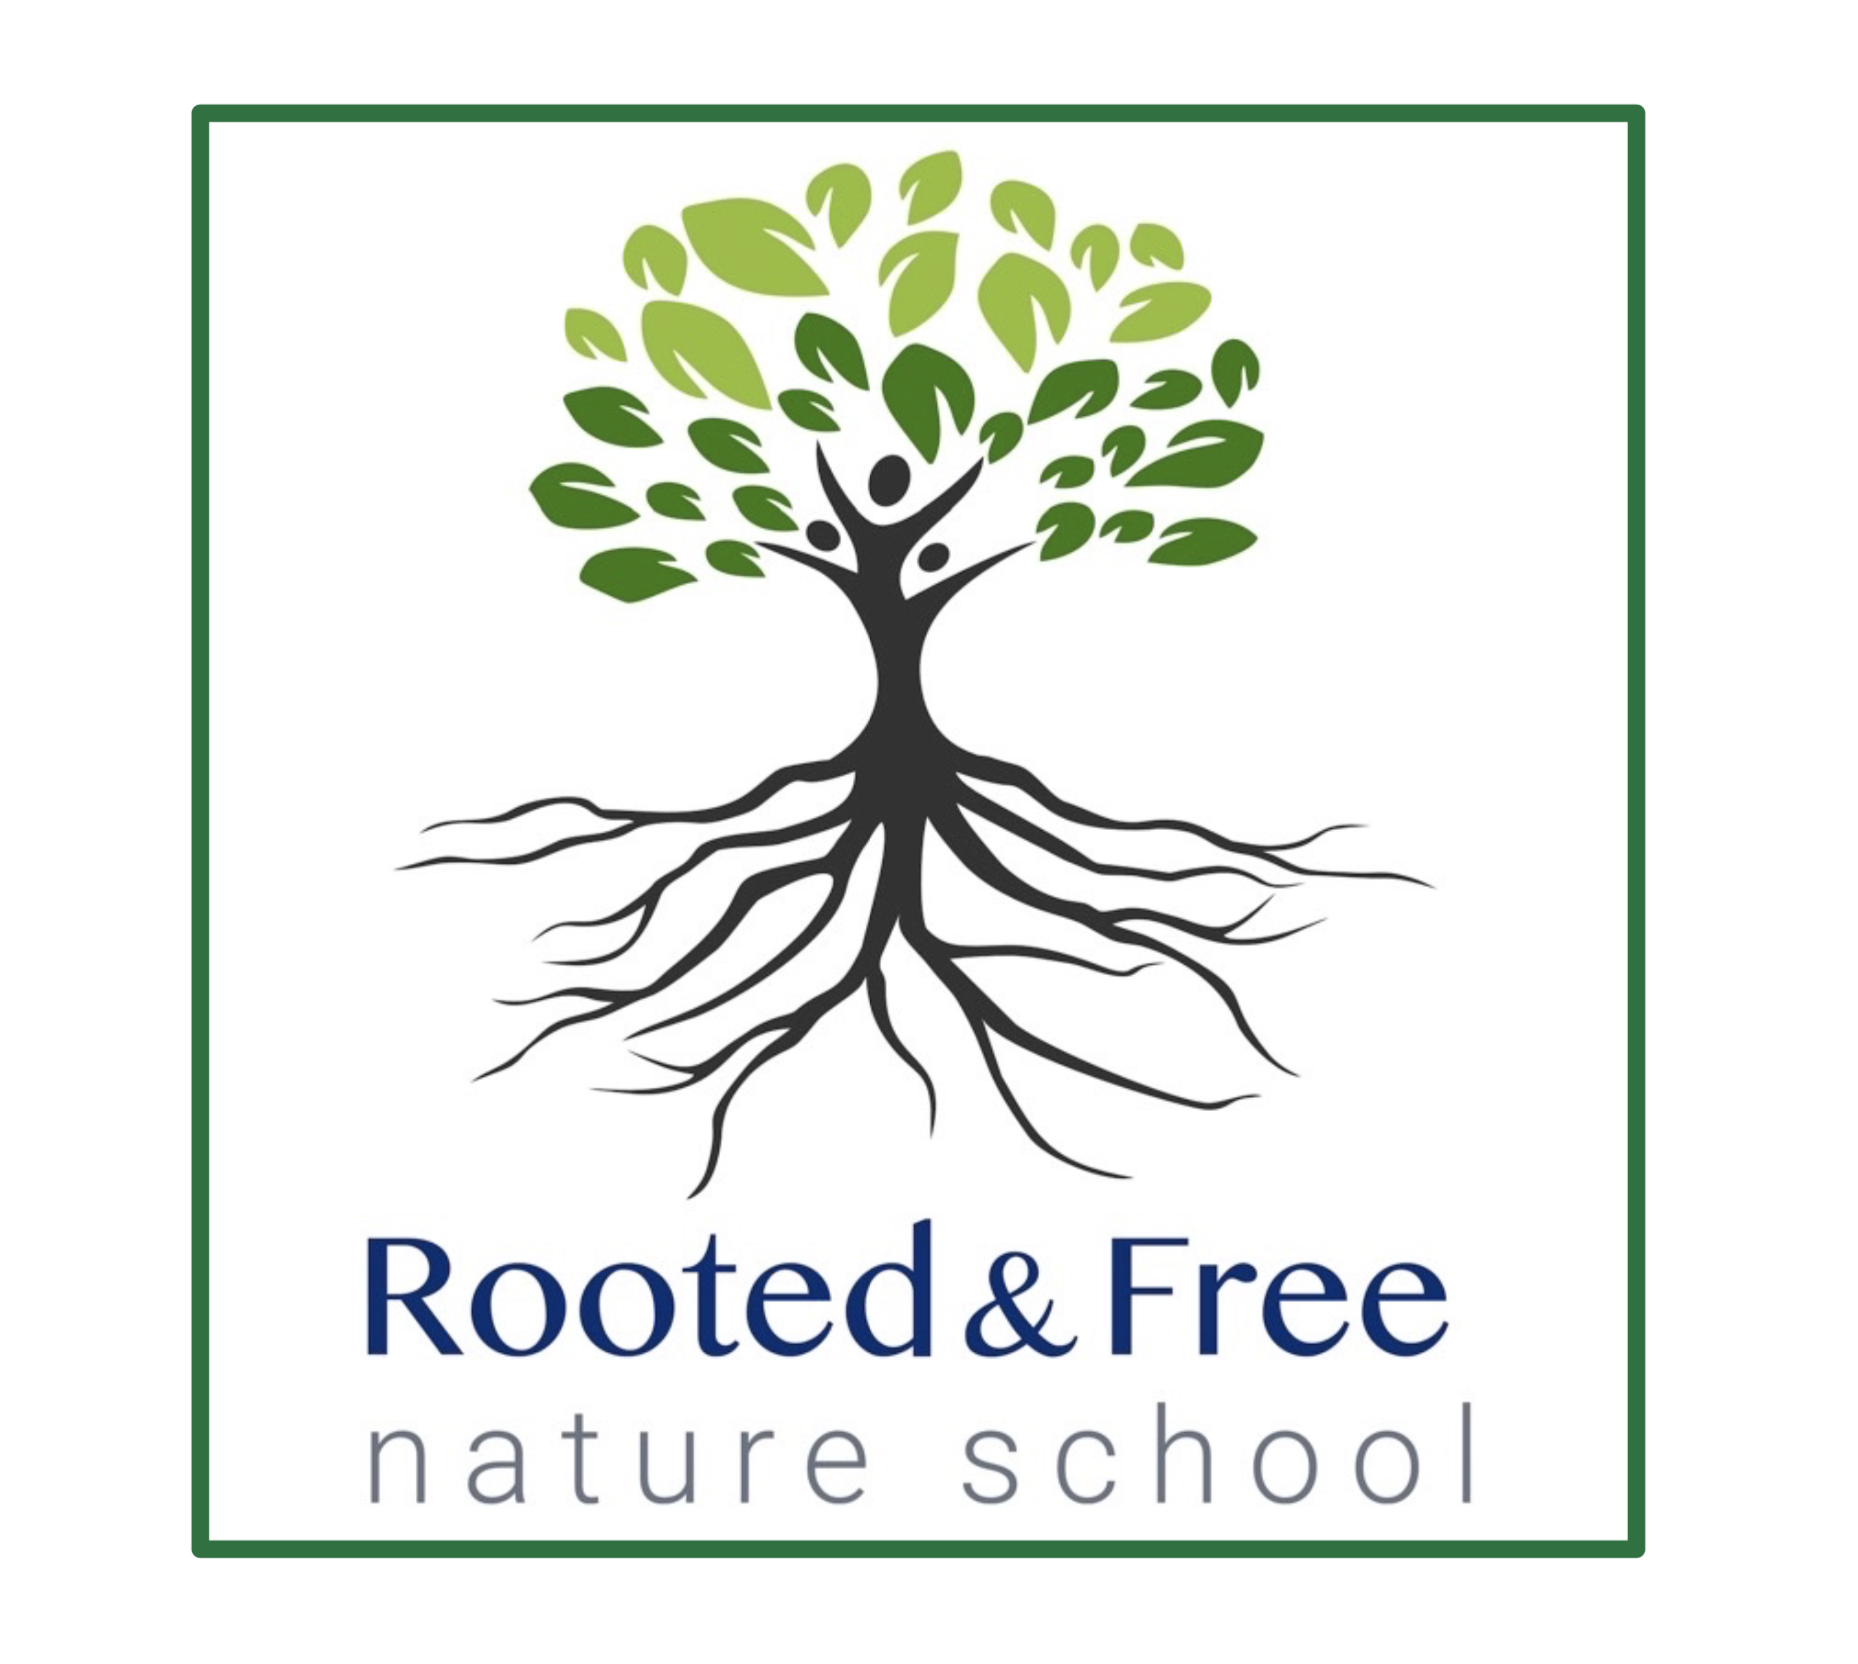 Rooted & Free Nature School